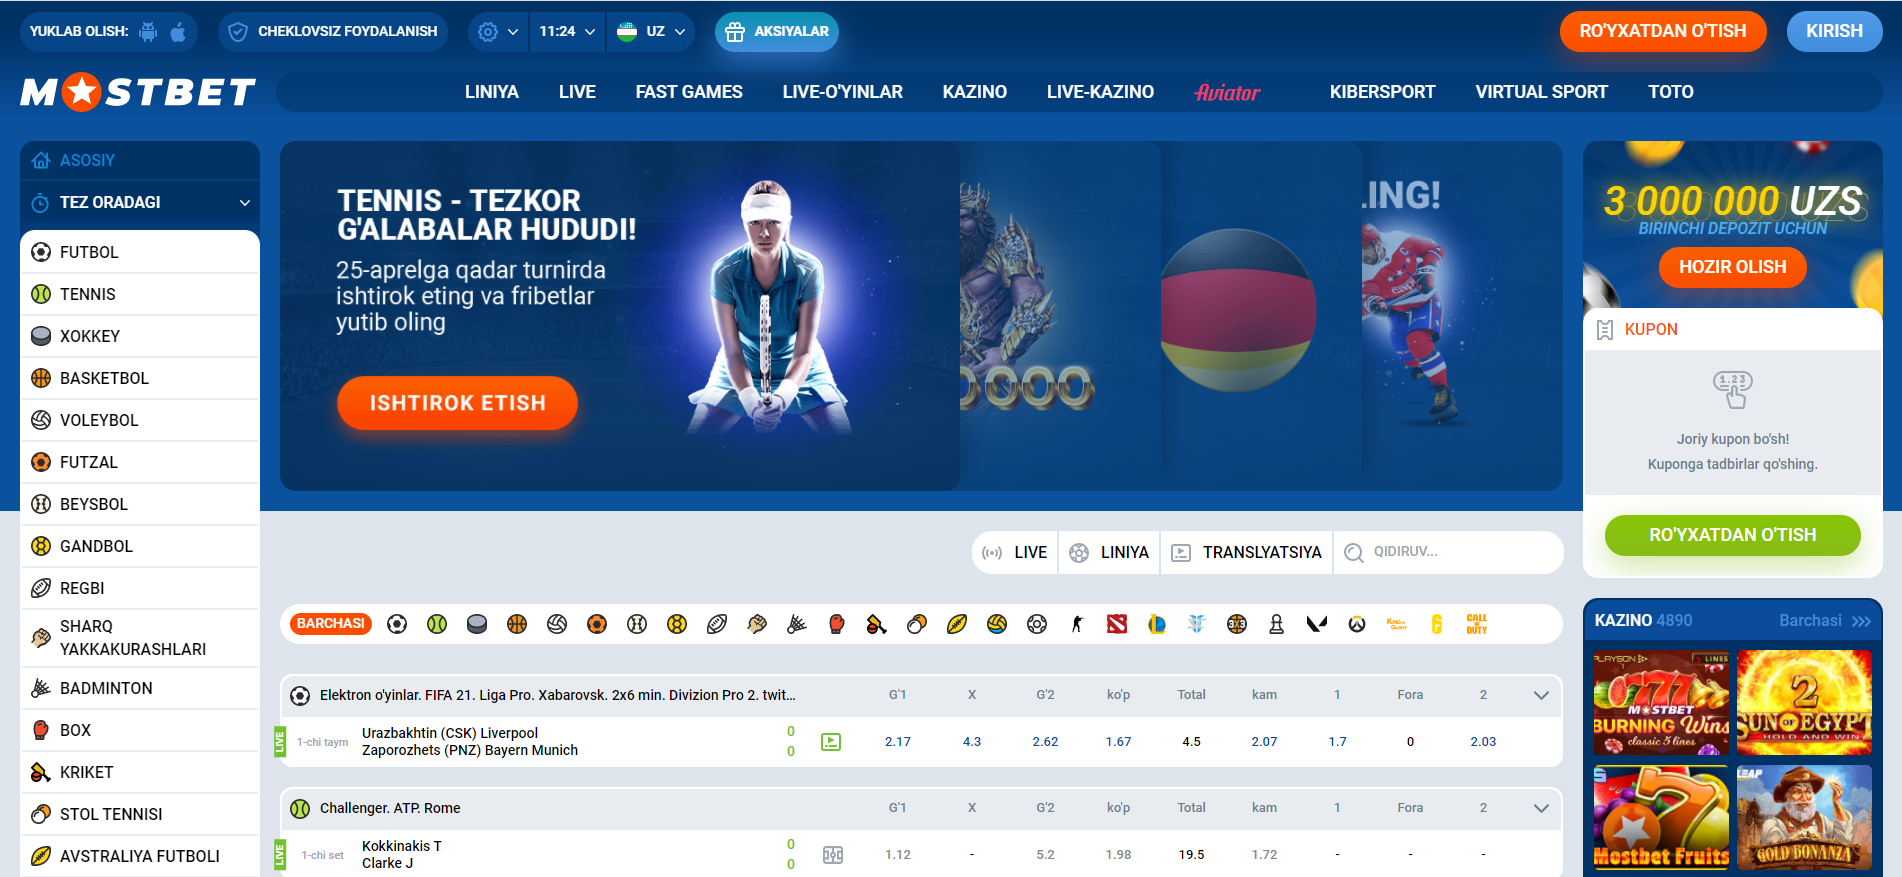 Cracking The Betting company Mostbet in the Czech Republic Code